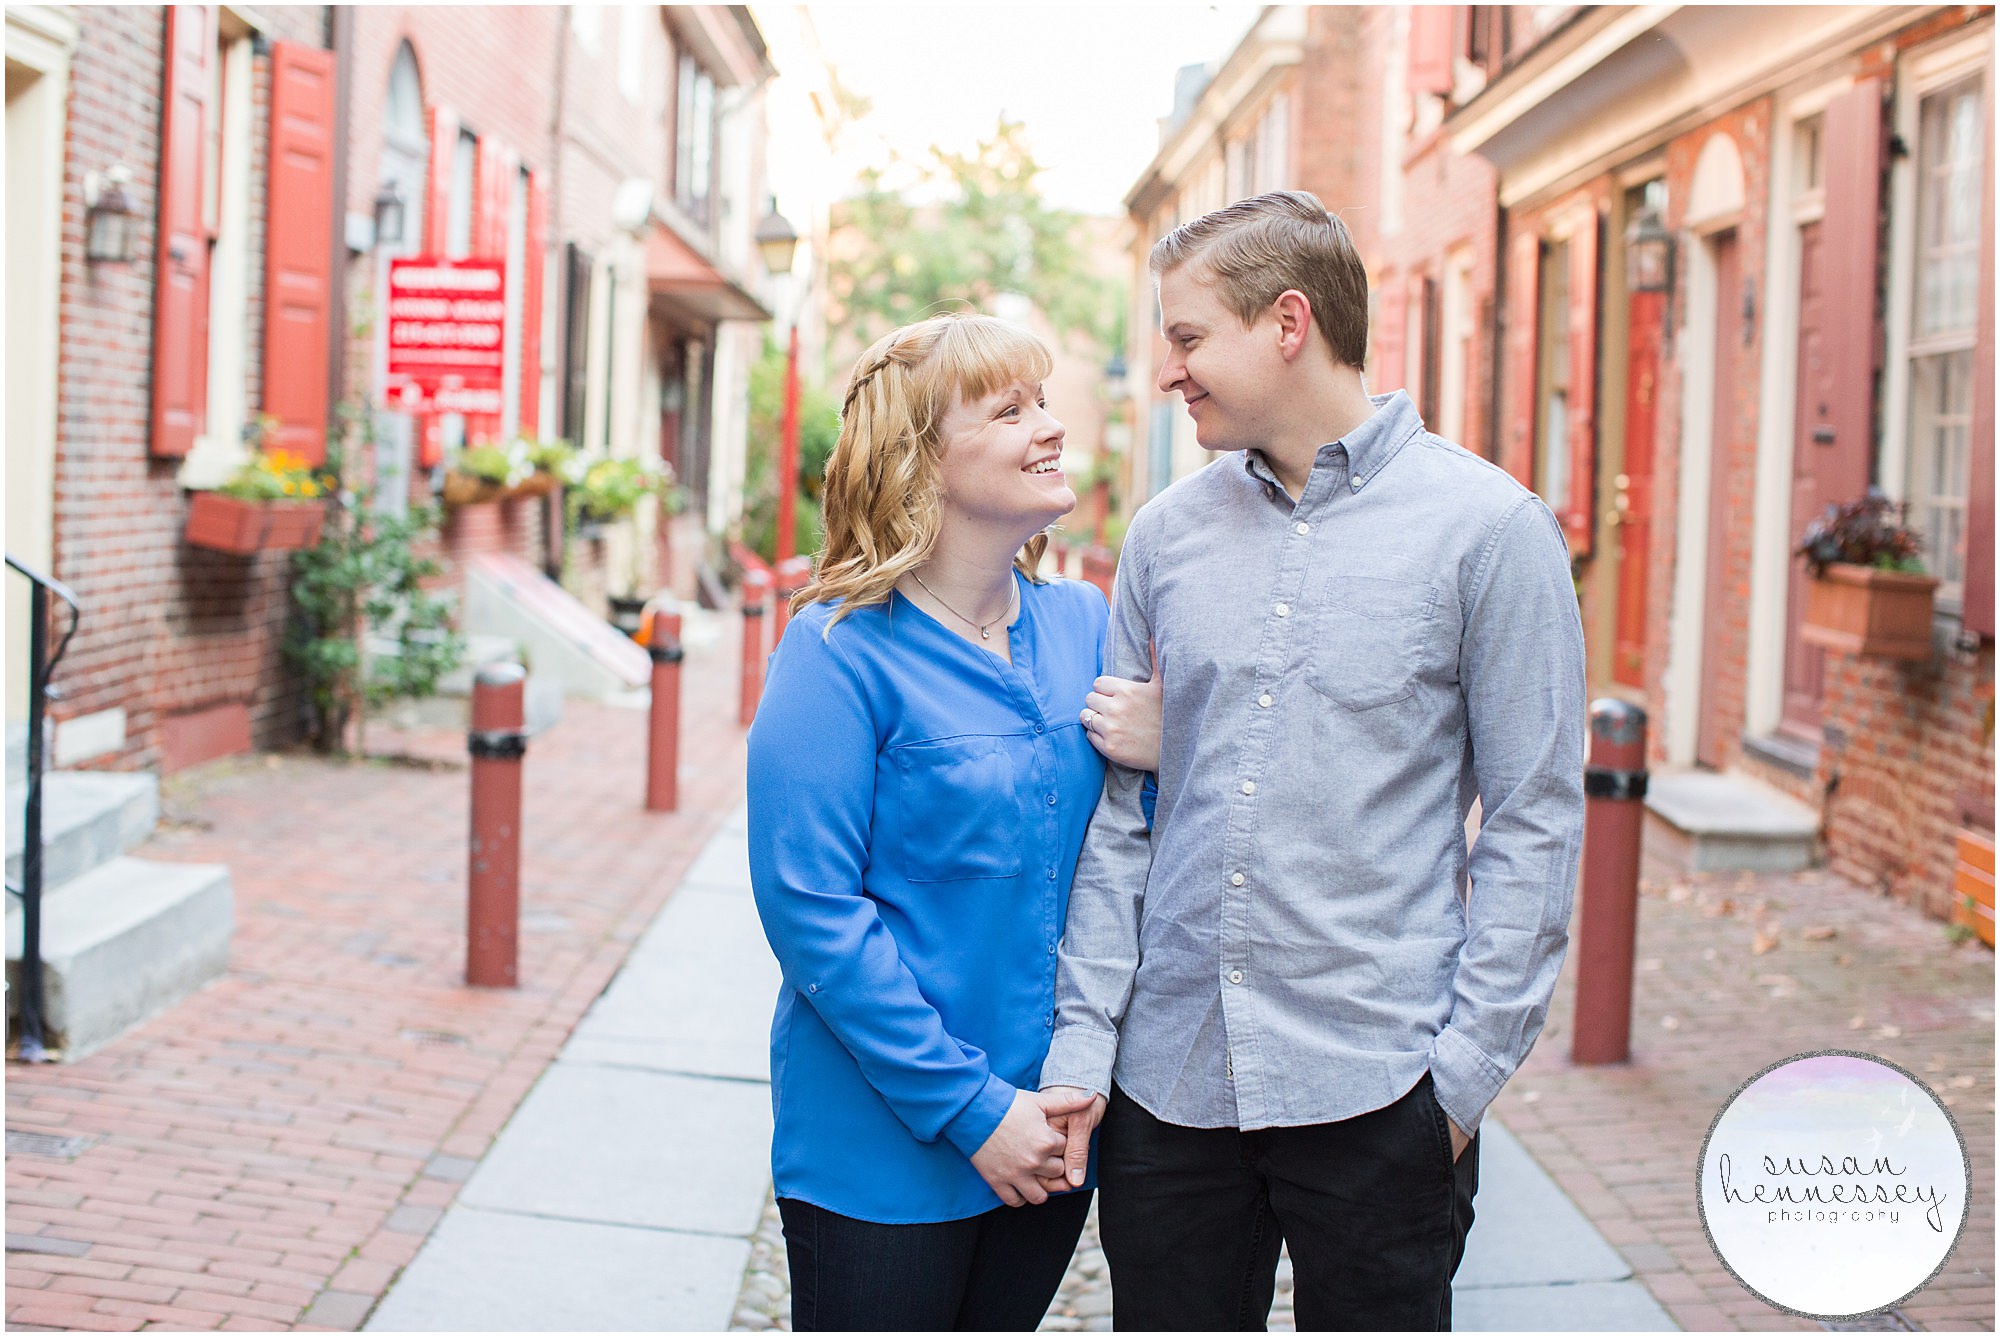 Elfreth's Alley is one of my favorite Philadelphia Engagement Photo Locations